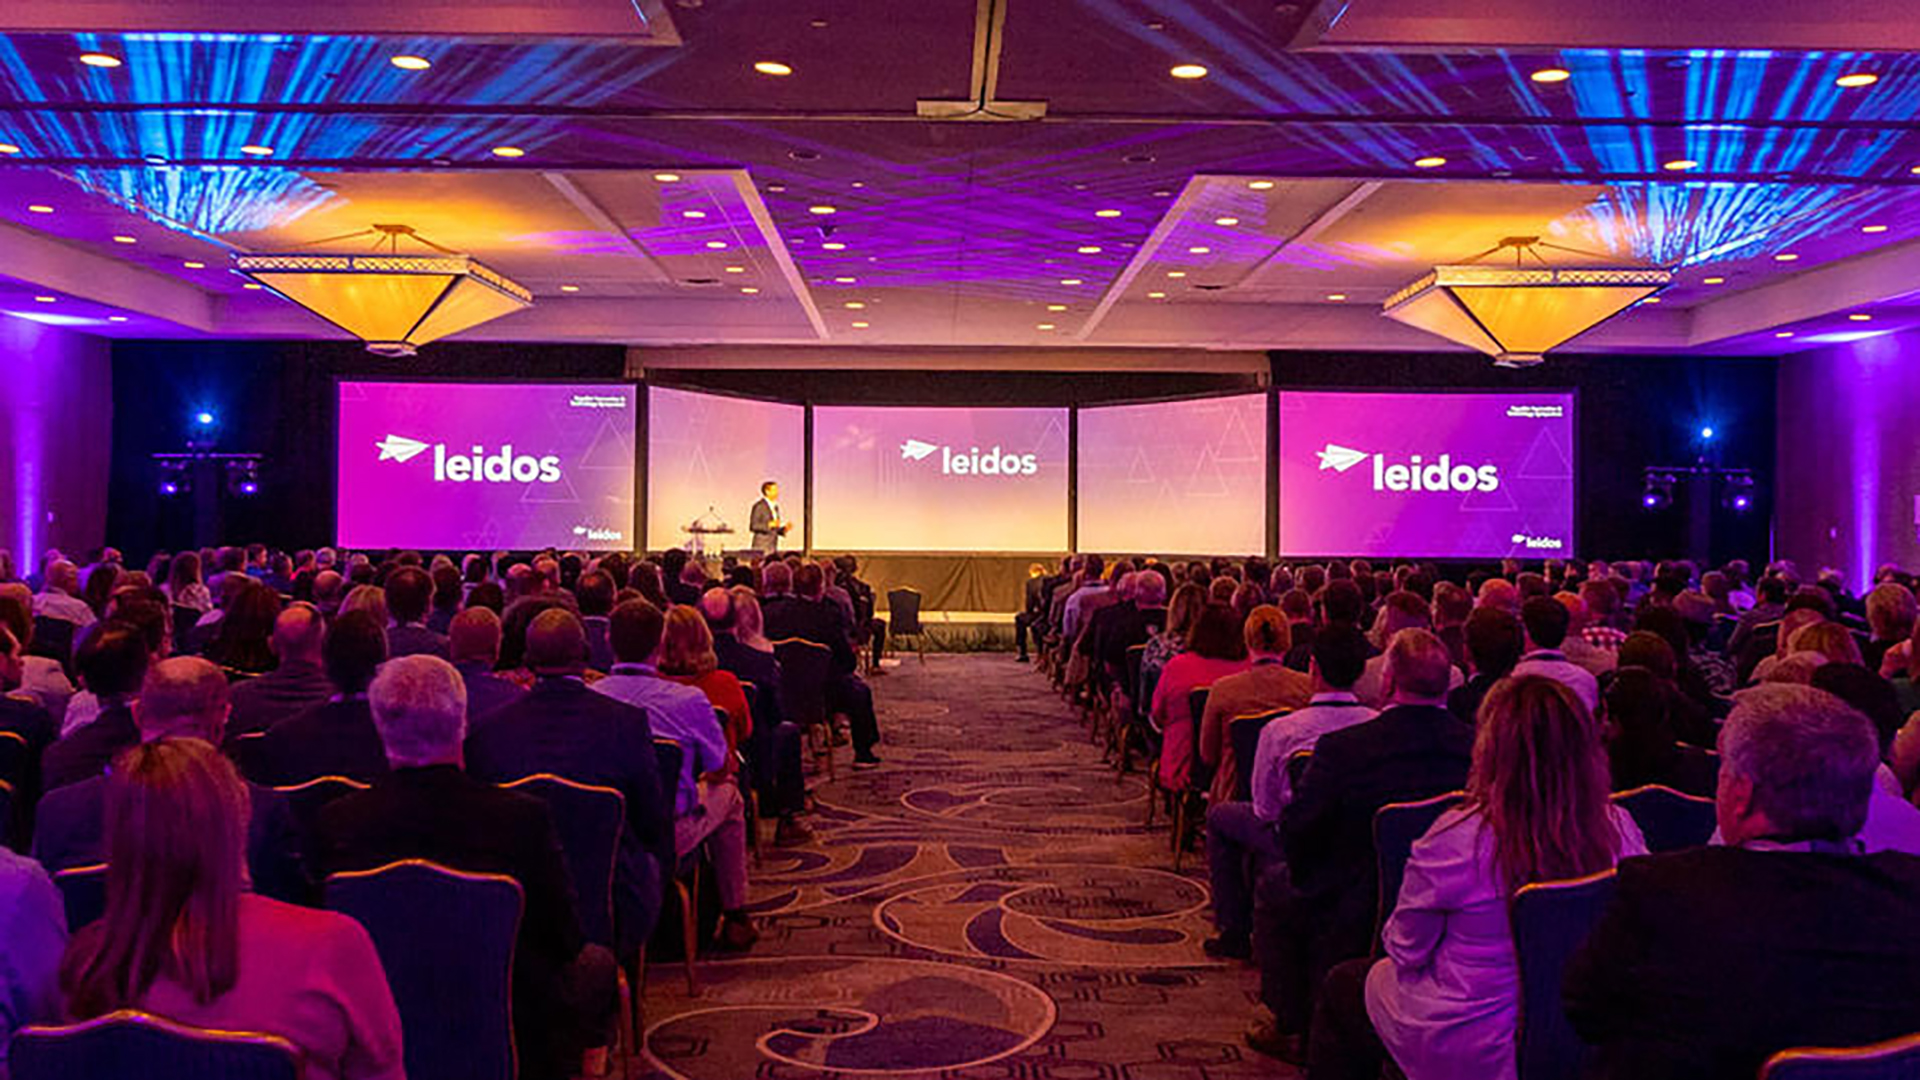 Leidos Supplier Symposium: Collaborating to Improve the User Experience